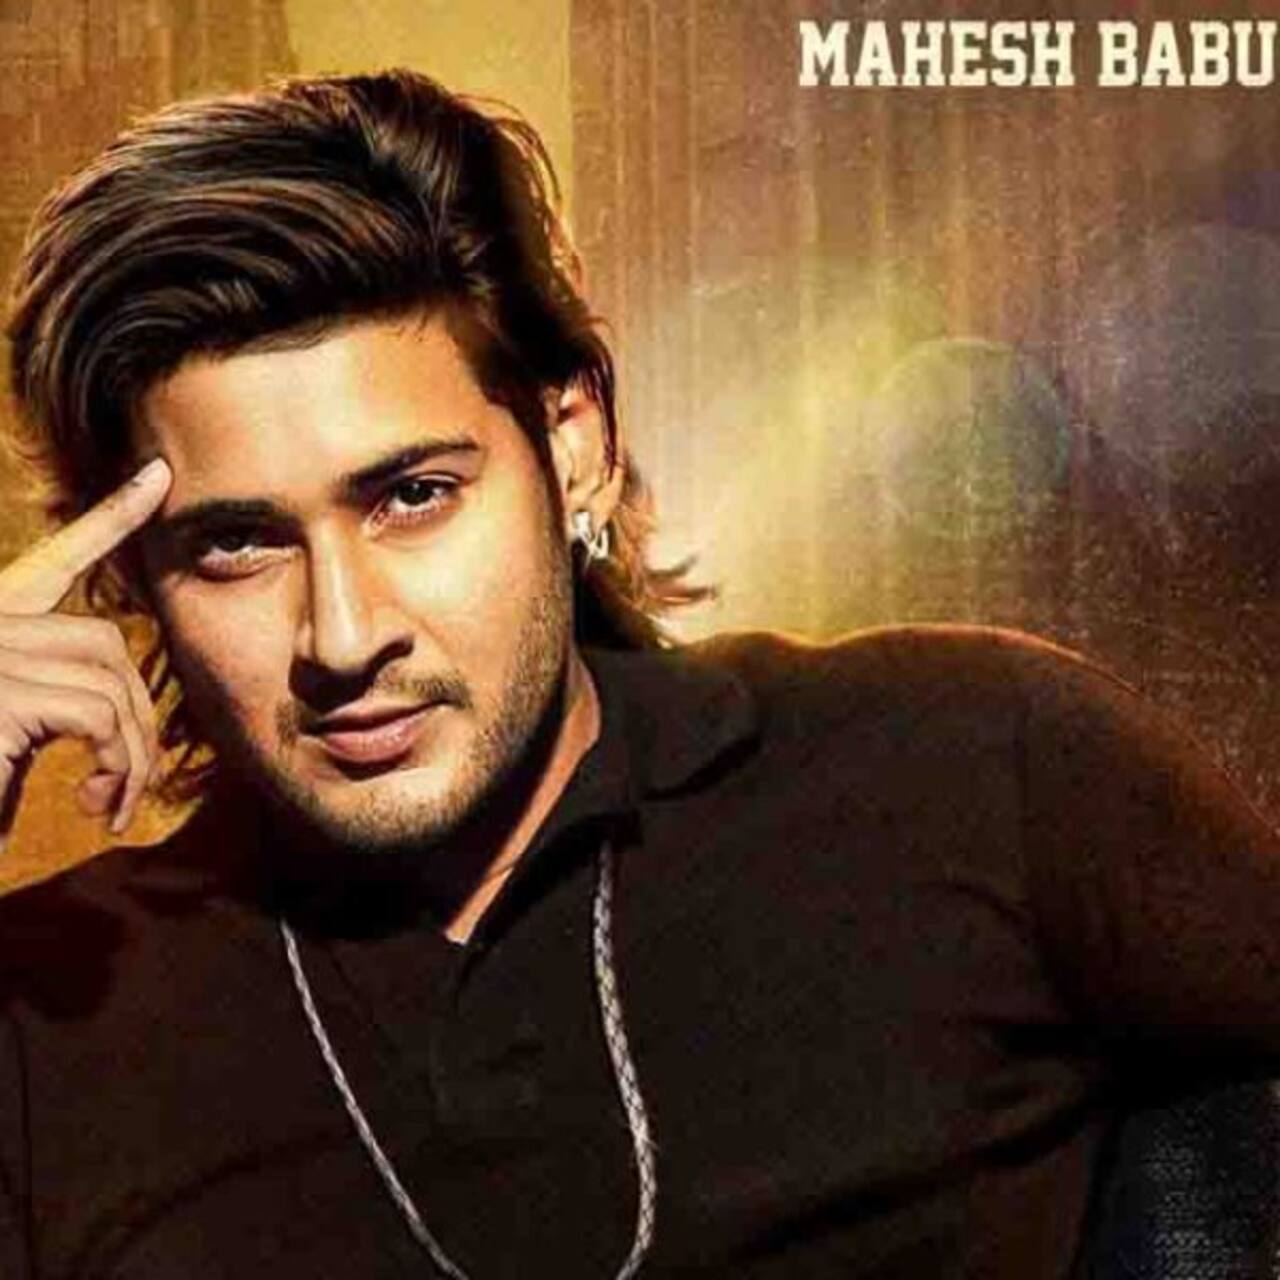 Mahesh Babu's biggest action sequence ever